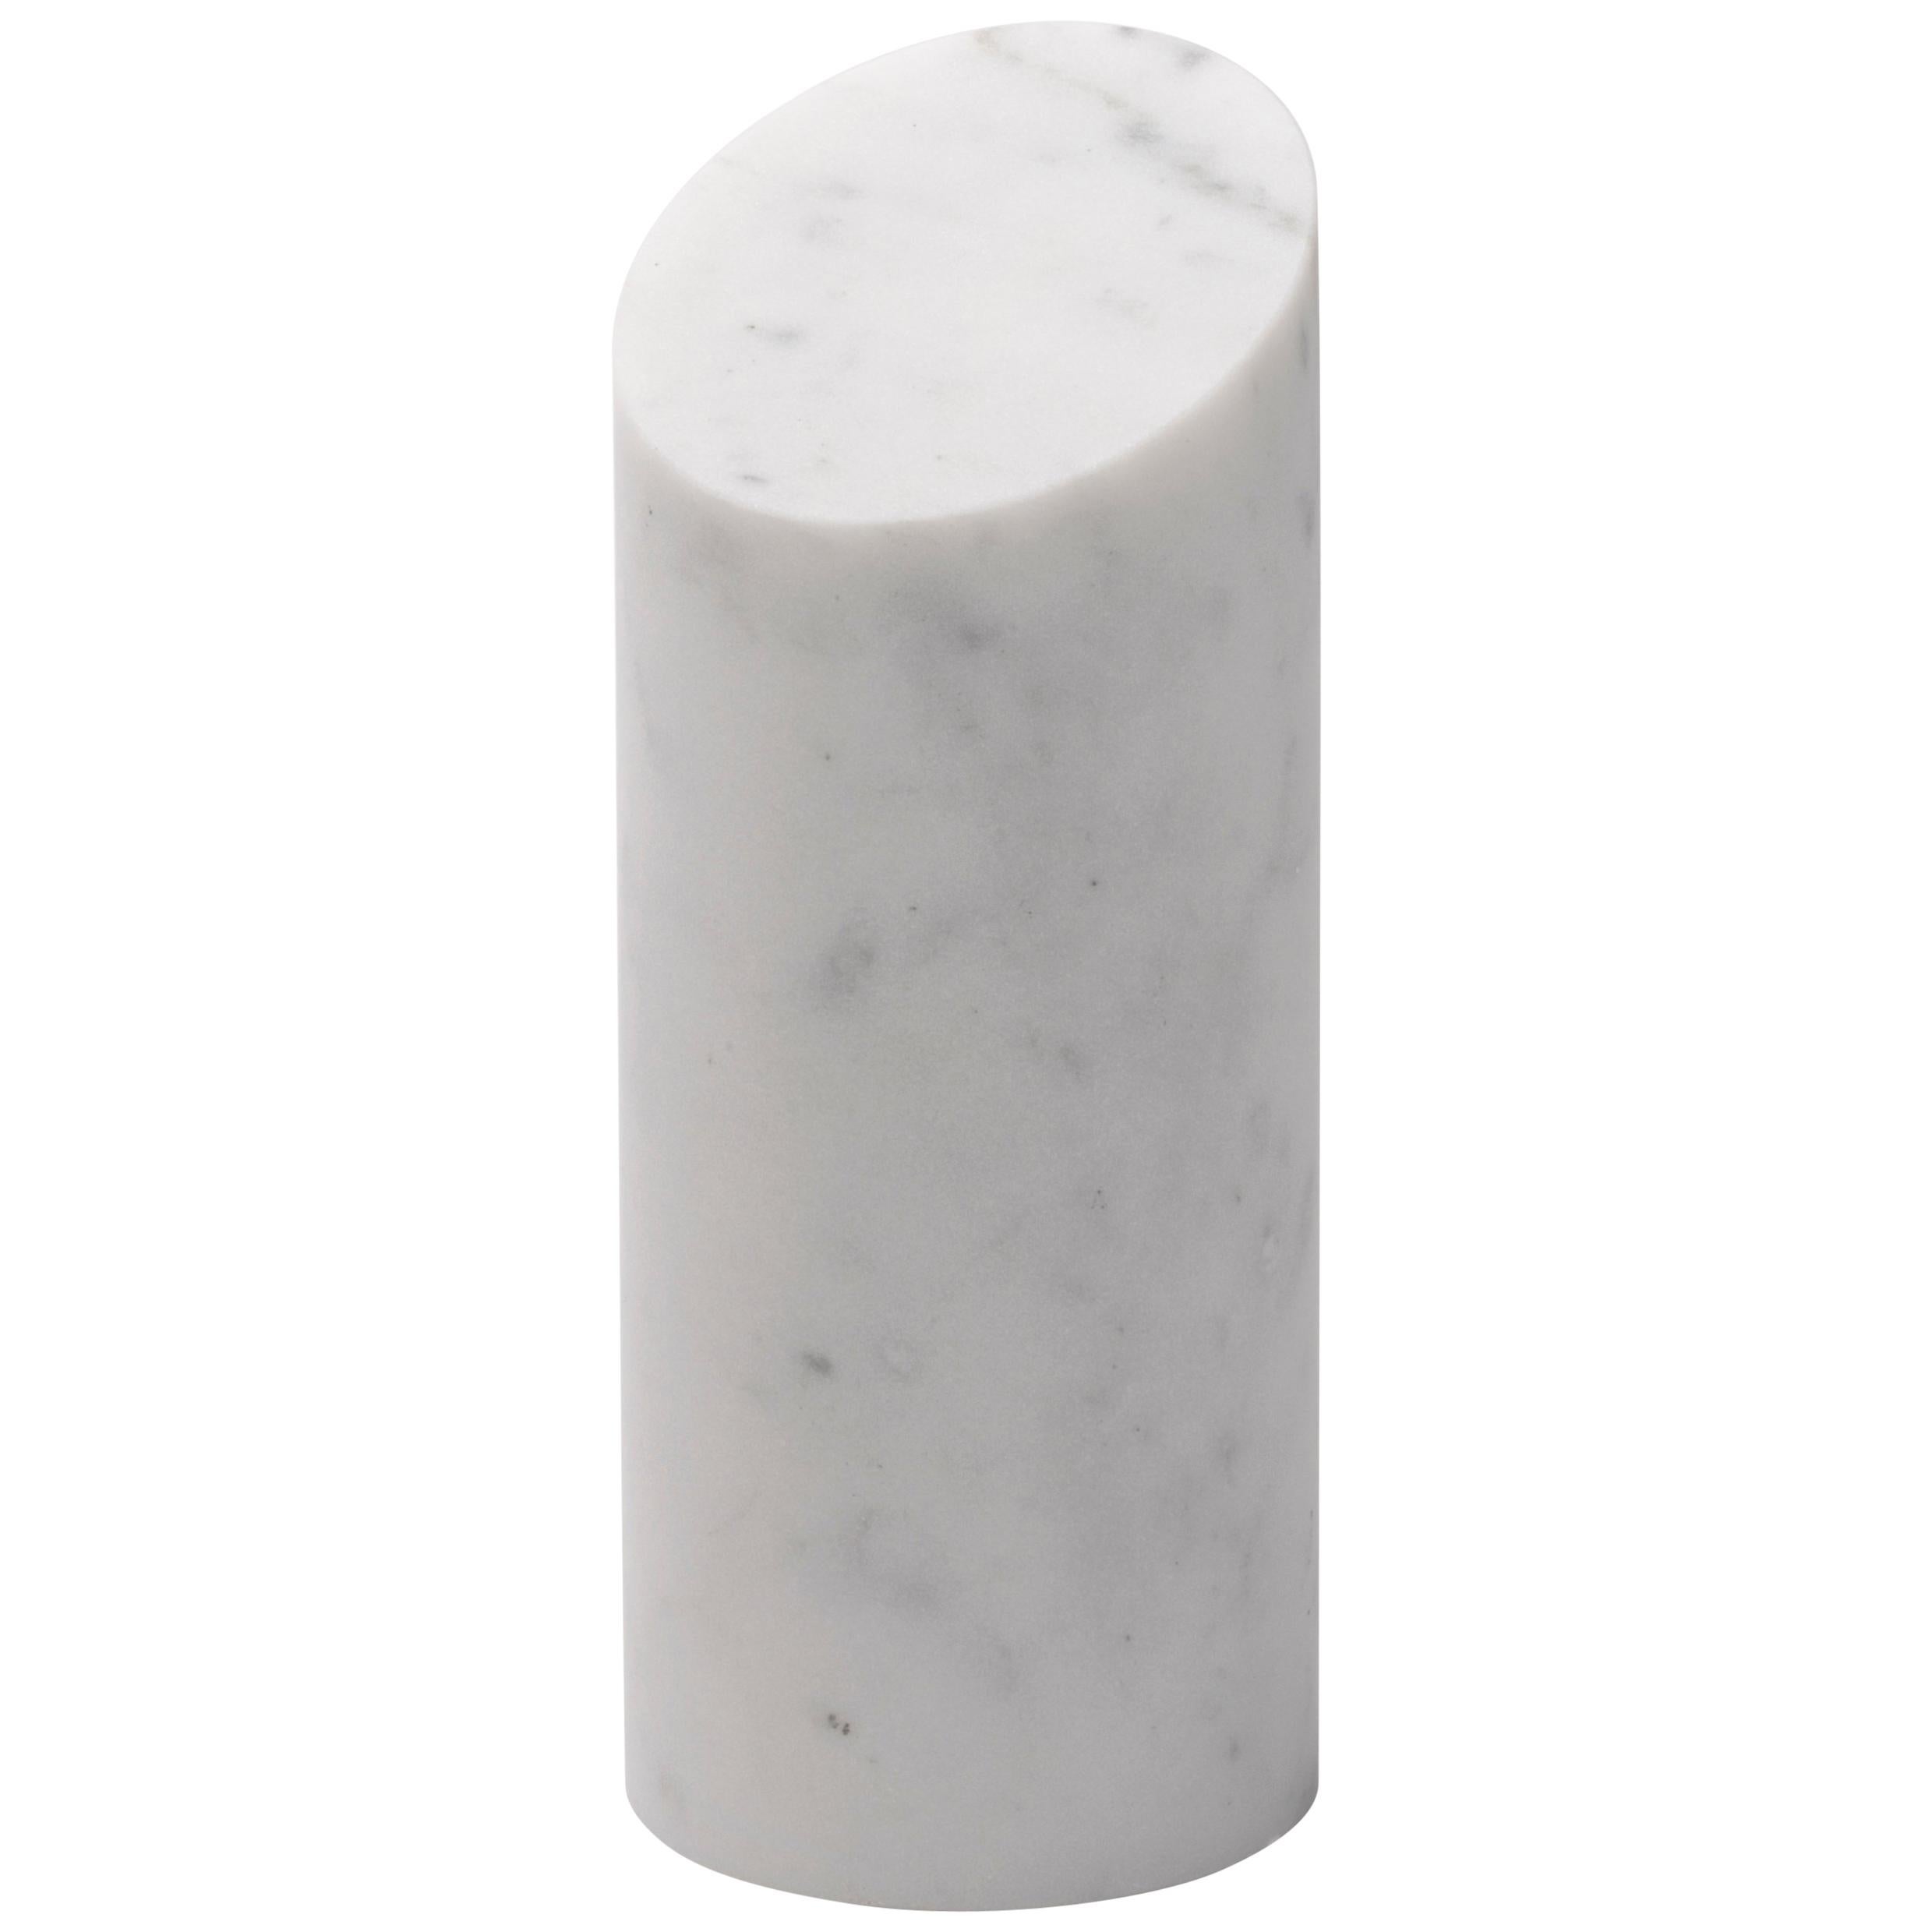 Salvatori Kilos Cylinder Paperweight in Bianco Carrara Marble by Elisa Ossino For Sale